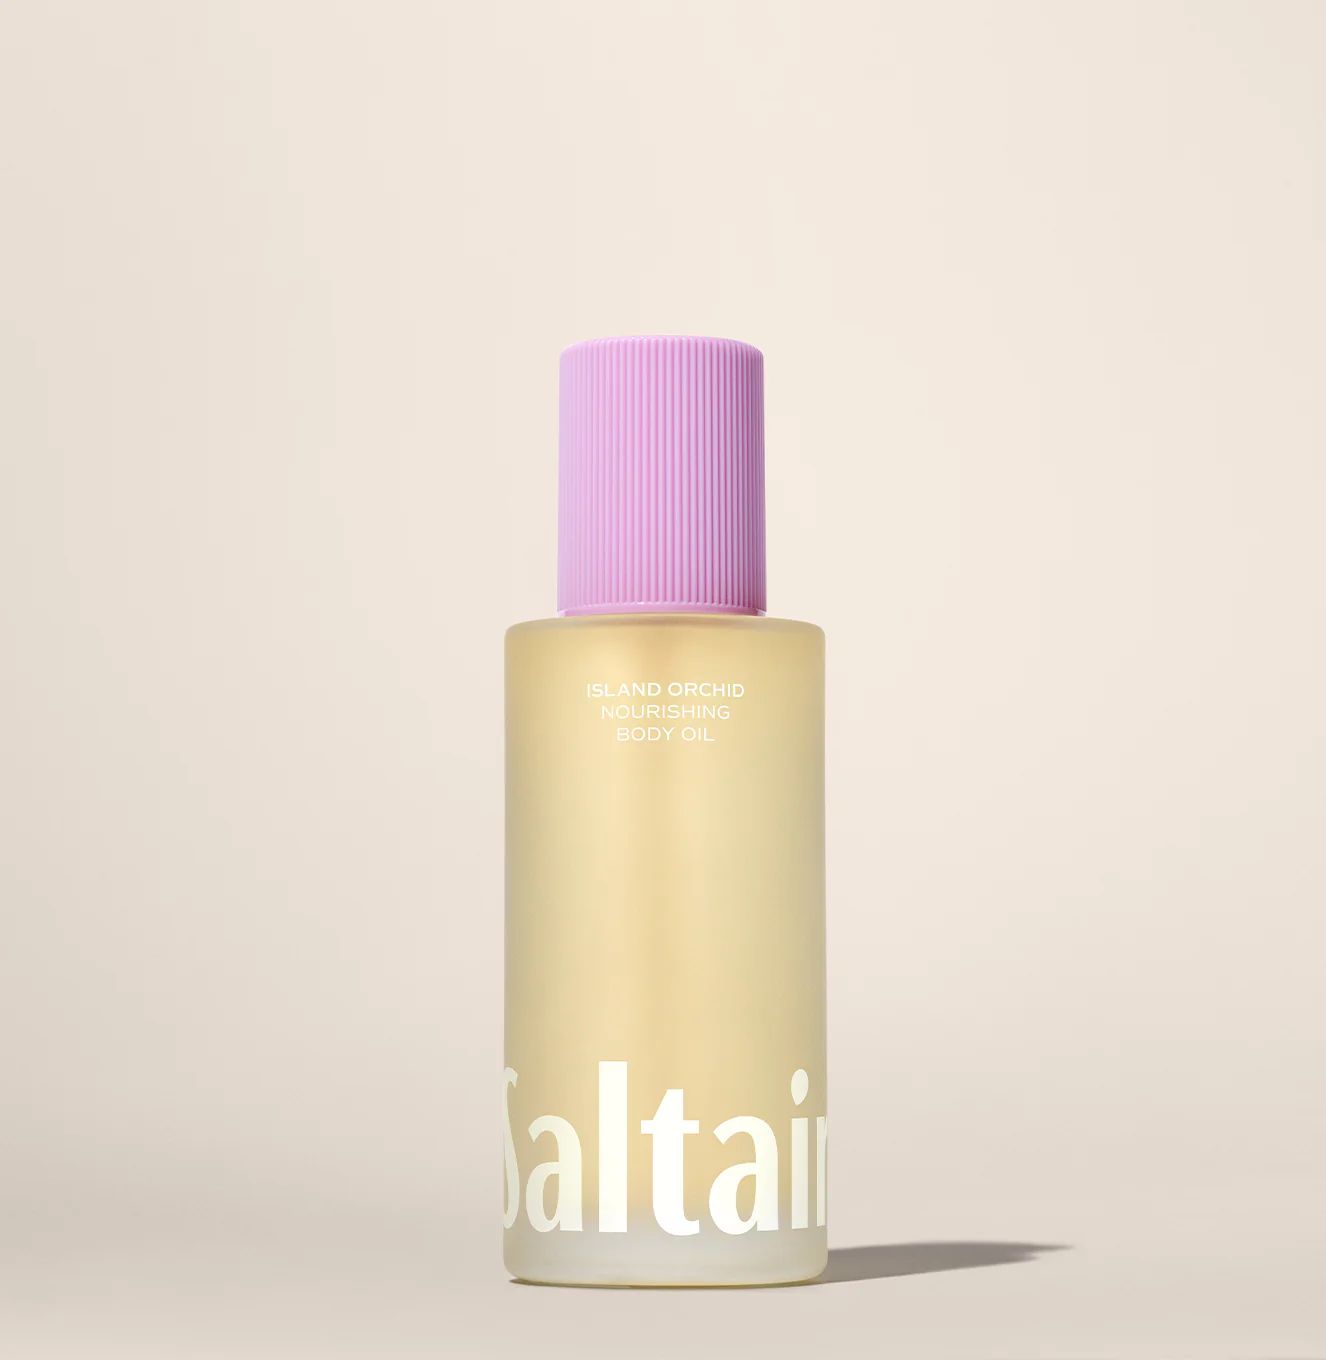 Island Orchid Body Oil For Glowing Skin | Saltair | Saltair